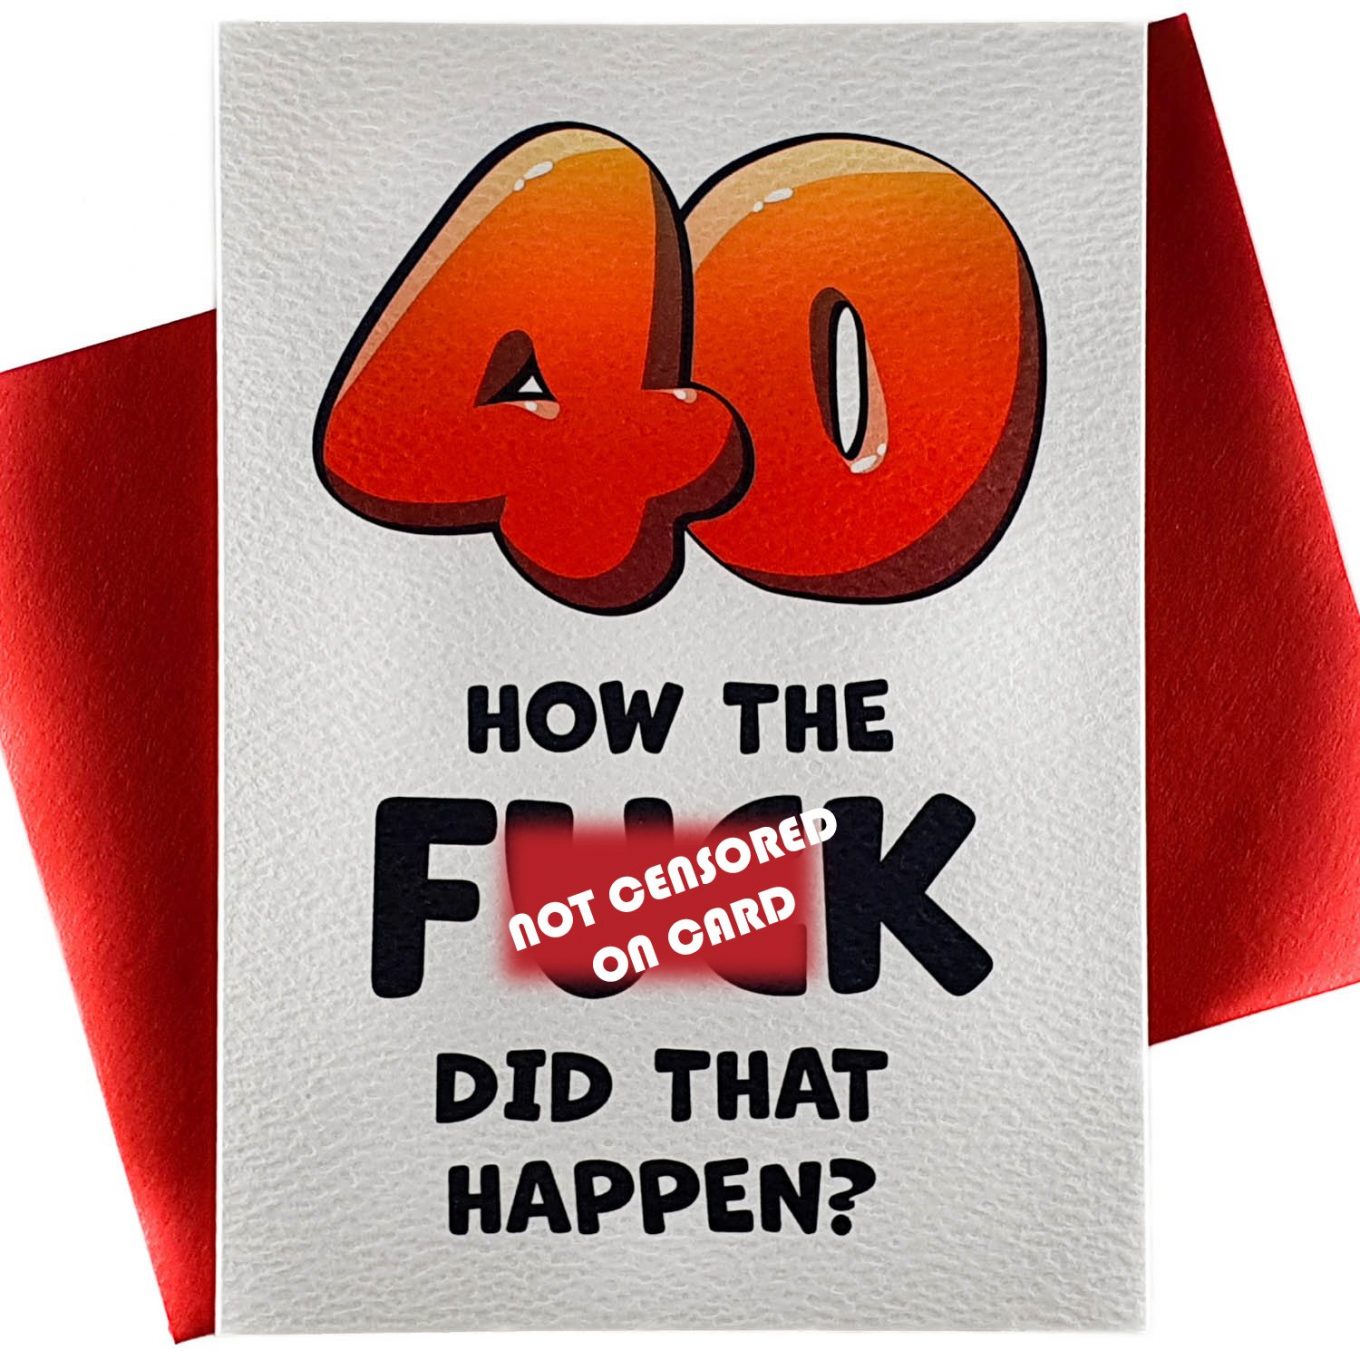 Funny Birthday Card 40th Anniversary How the Fuck Hilarious Gifts Humorous Luxury Gift Premium Love Present Made to impress! Red Envelope